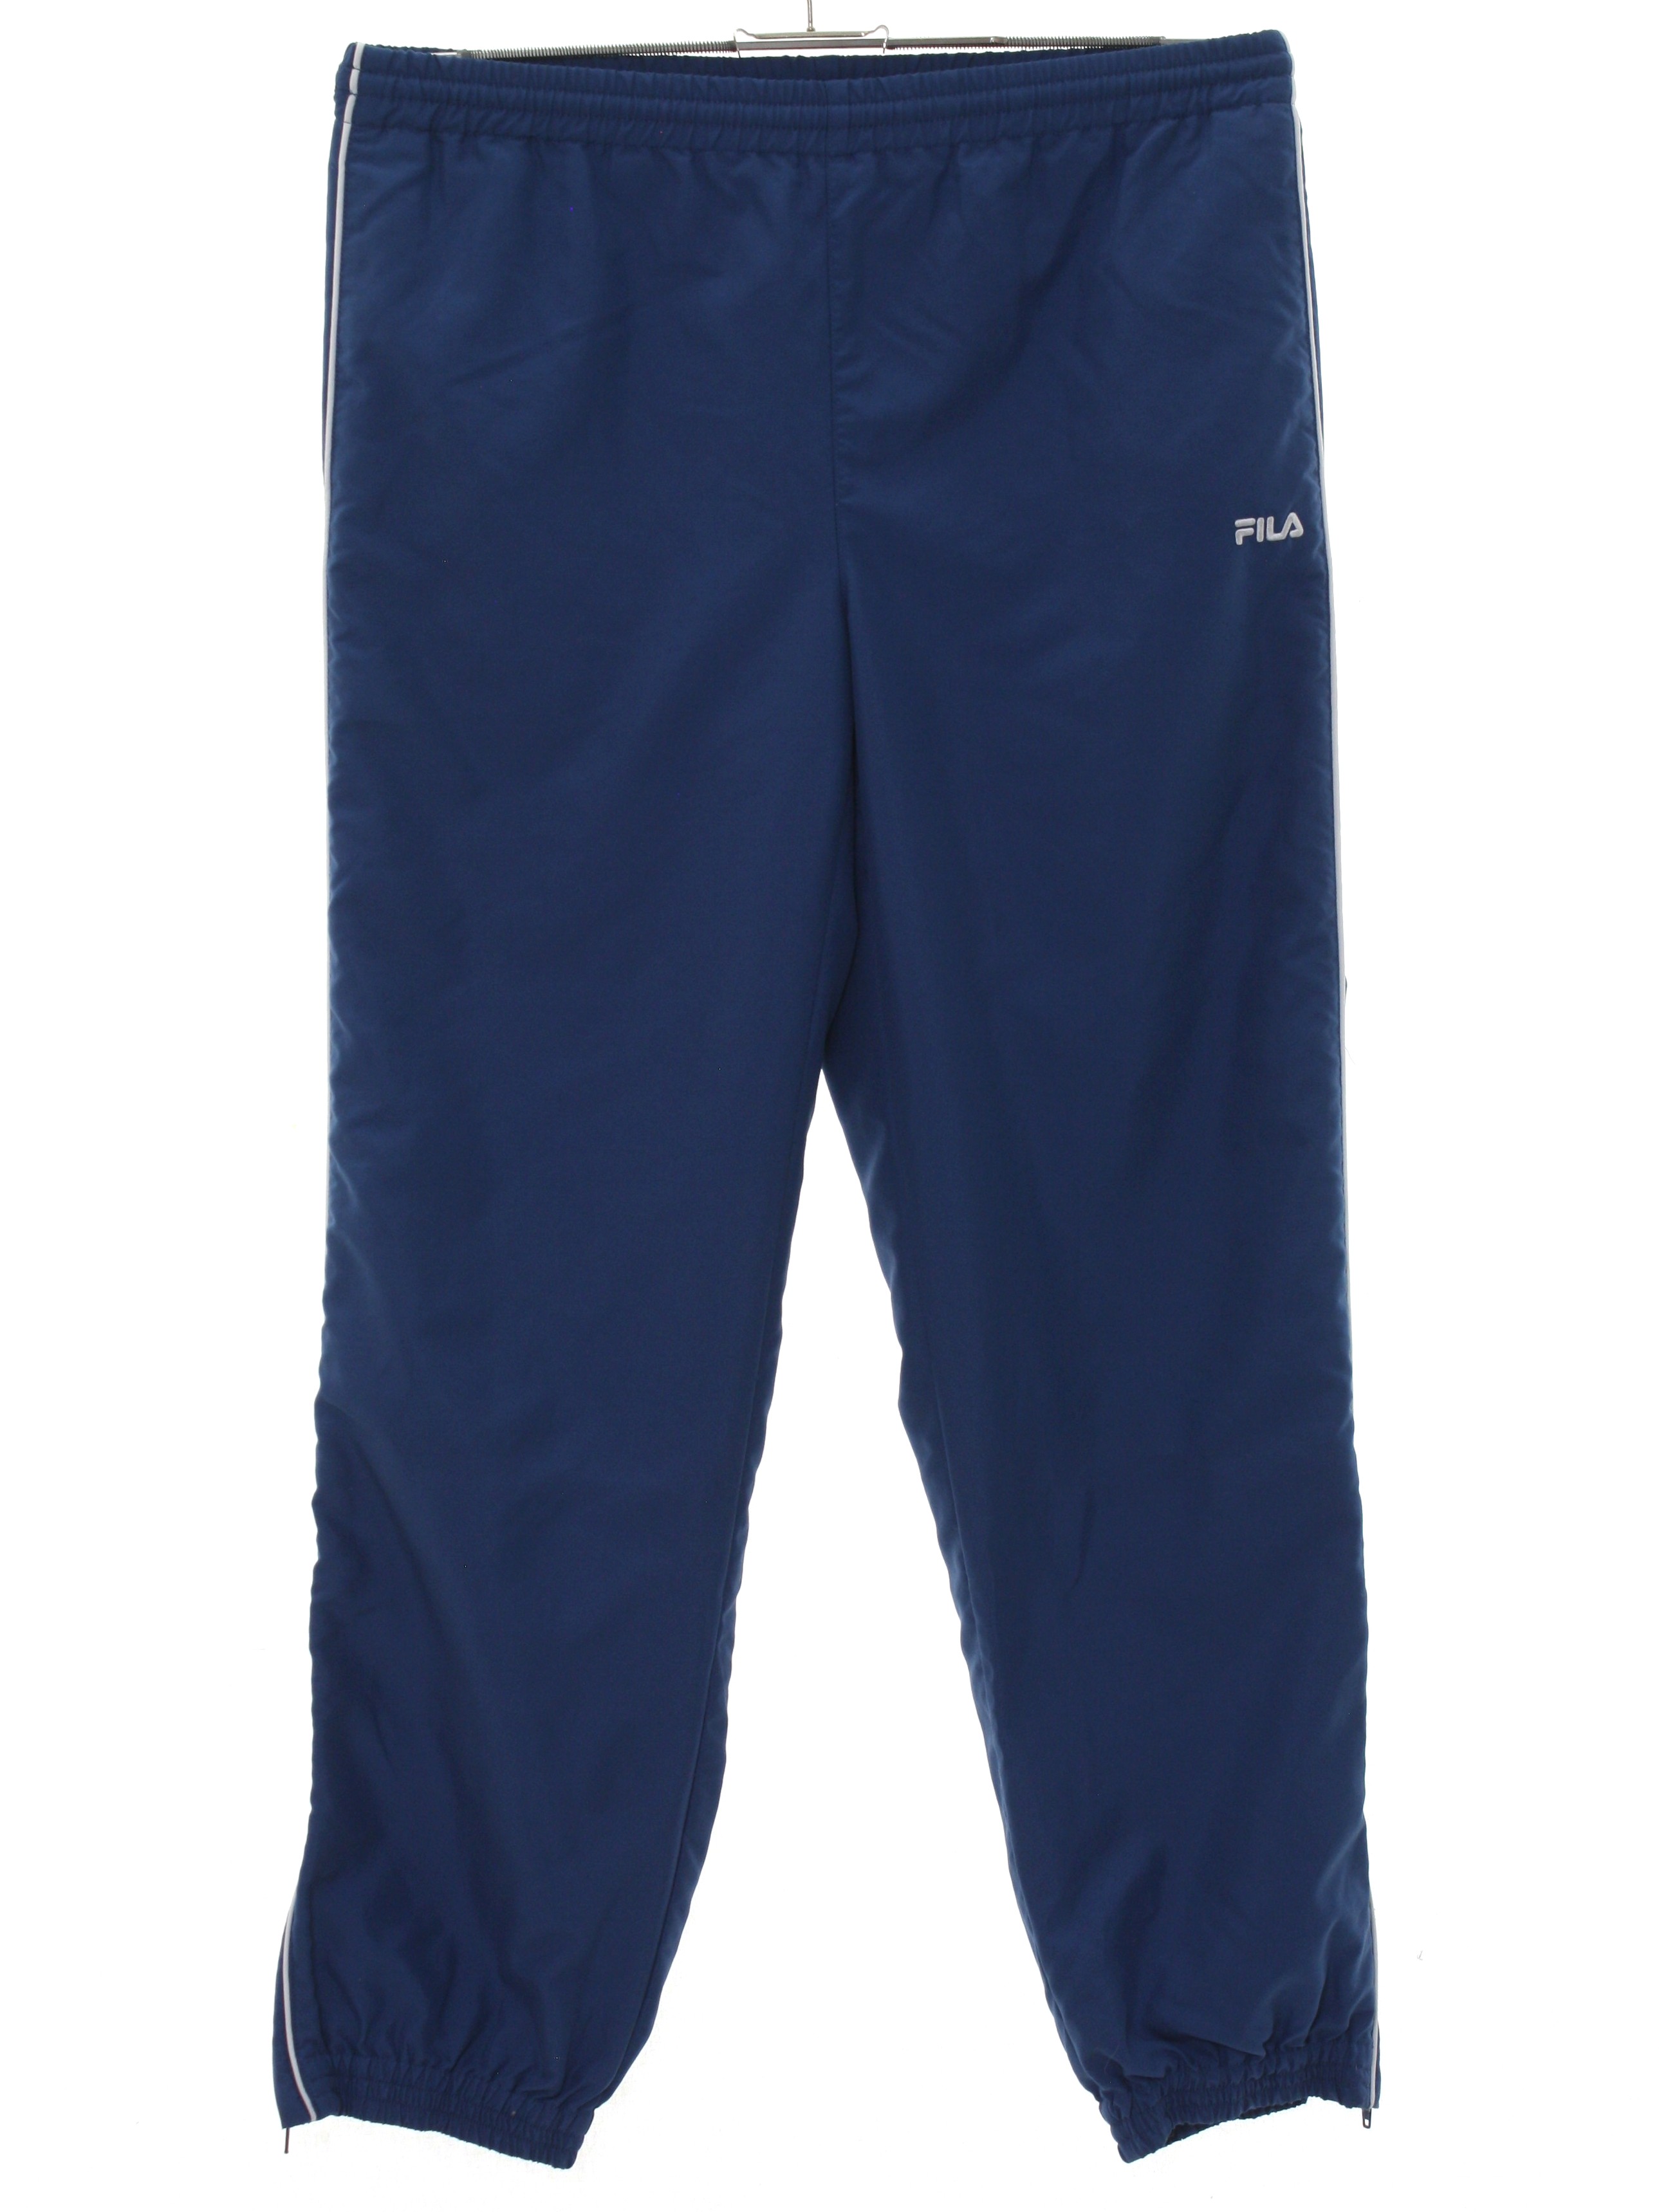 Pants: 90s -Fila- Mens deep powder blue solid colored polyester flat ...